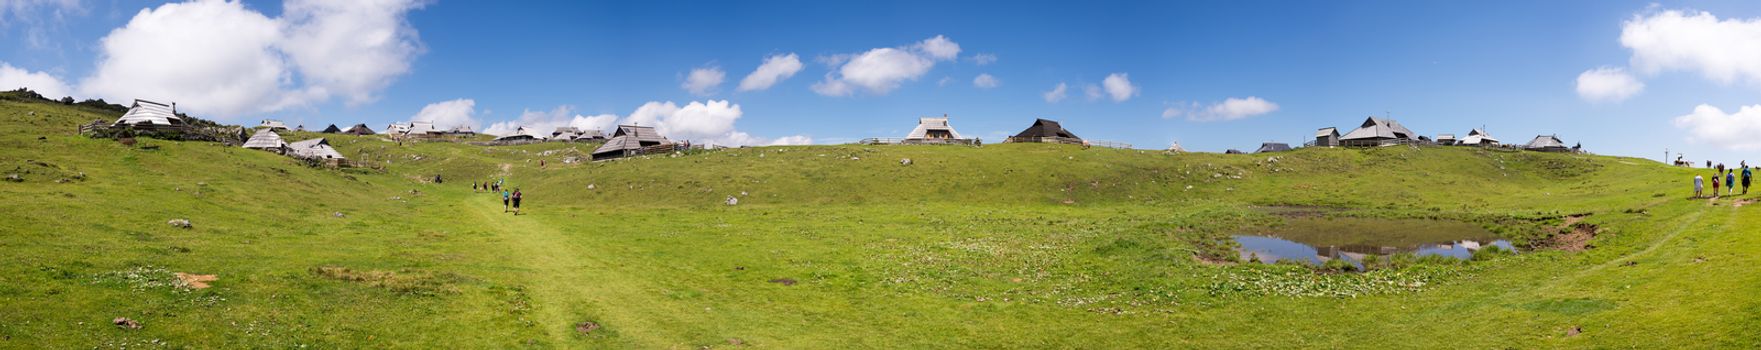 Extreme large panorama of Velika planina plateau, Slovenia, Mountain village in Alps, wooden houses in traditional style, popular hiking destination